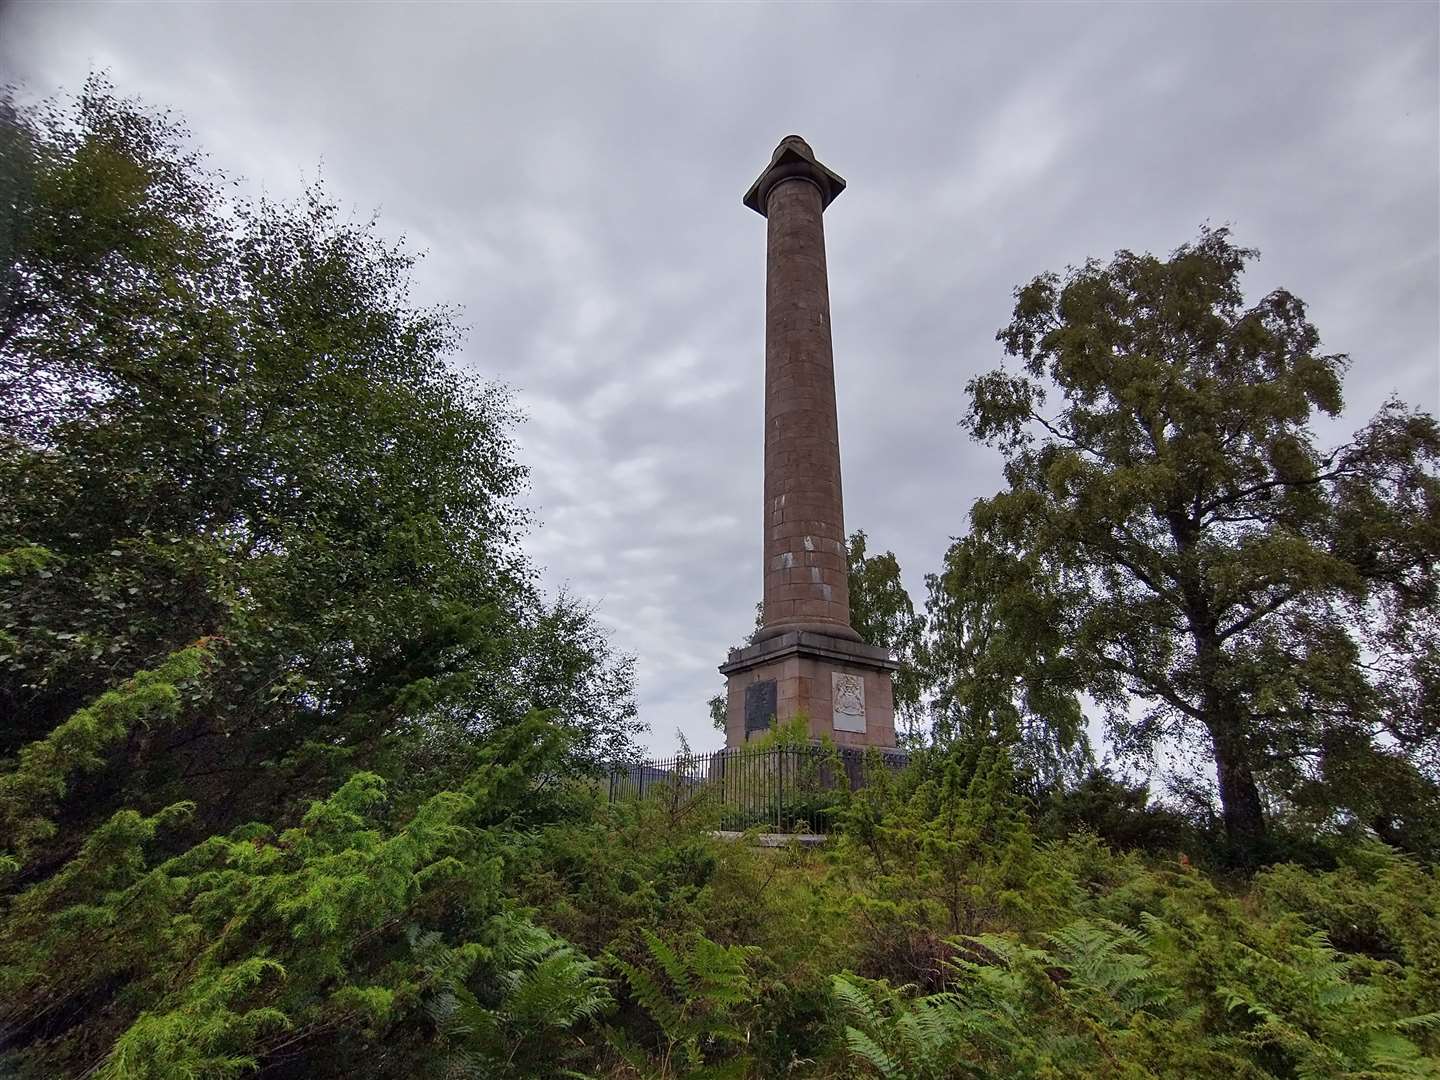 The Duke of Gordon's Monument at the top of the hill.